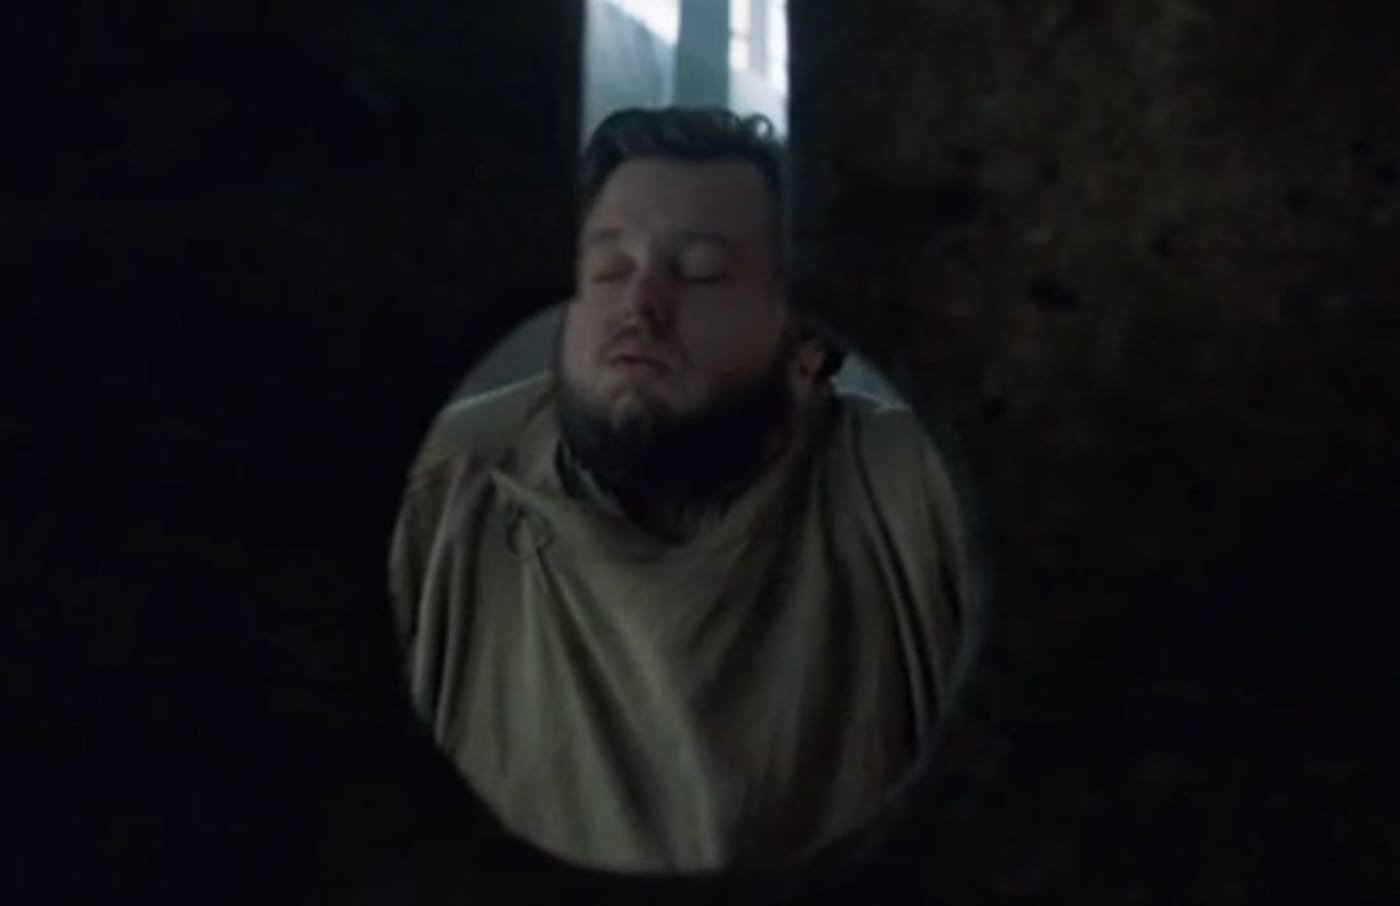 Samwell Tarley nearly ralphs while cleaning the latrine.